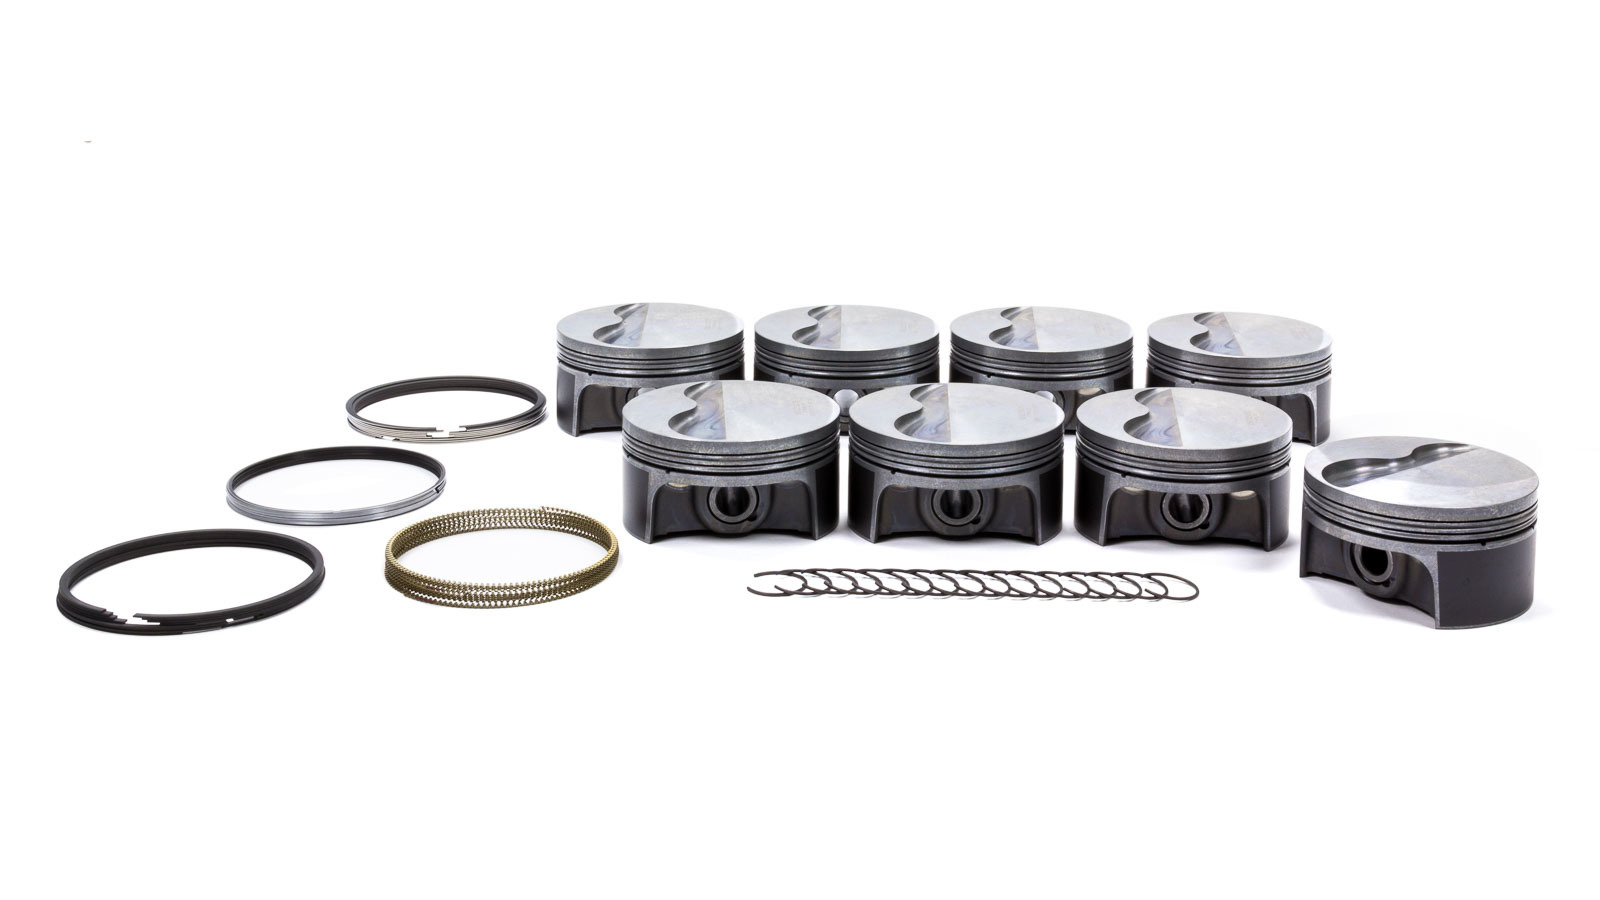 Mahle Pistons 930223075 Piston and Ring, PowerPak, Forged, 4.075 in Bore, 1.0 x 1.0 x 2.0 mm Ring Groove, Minus 4.00 cc, GM LS-Series, Kit